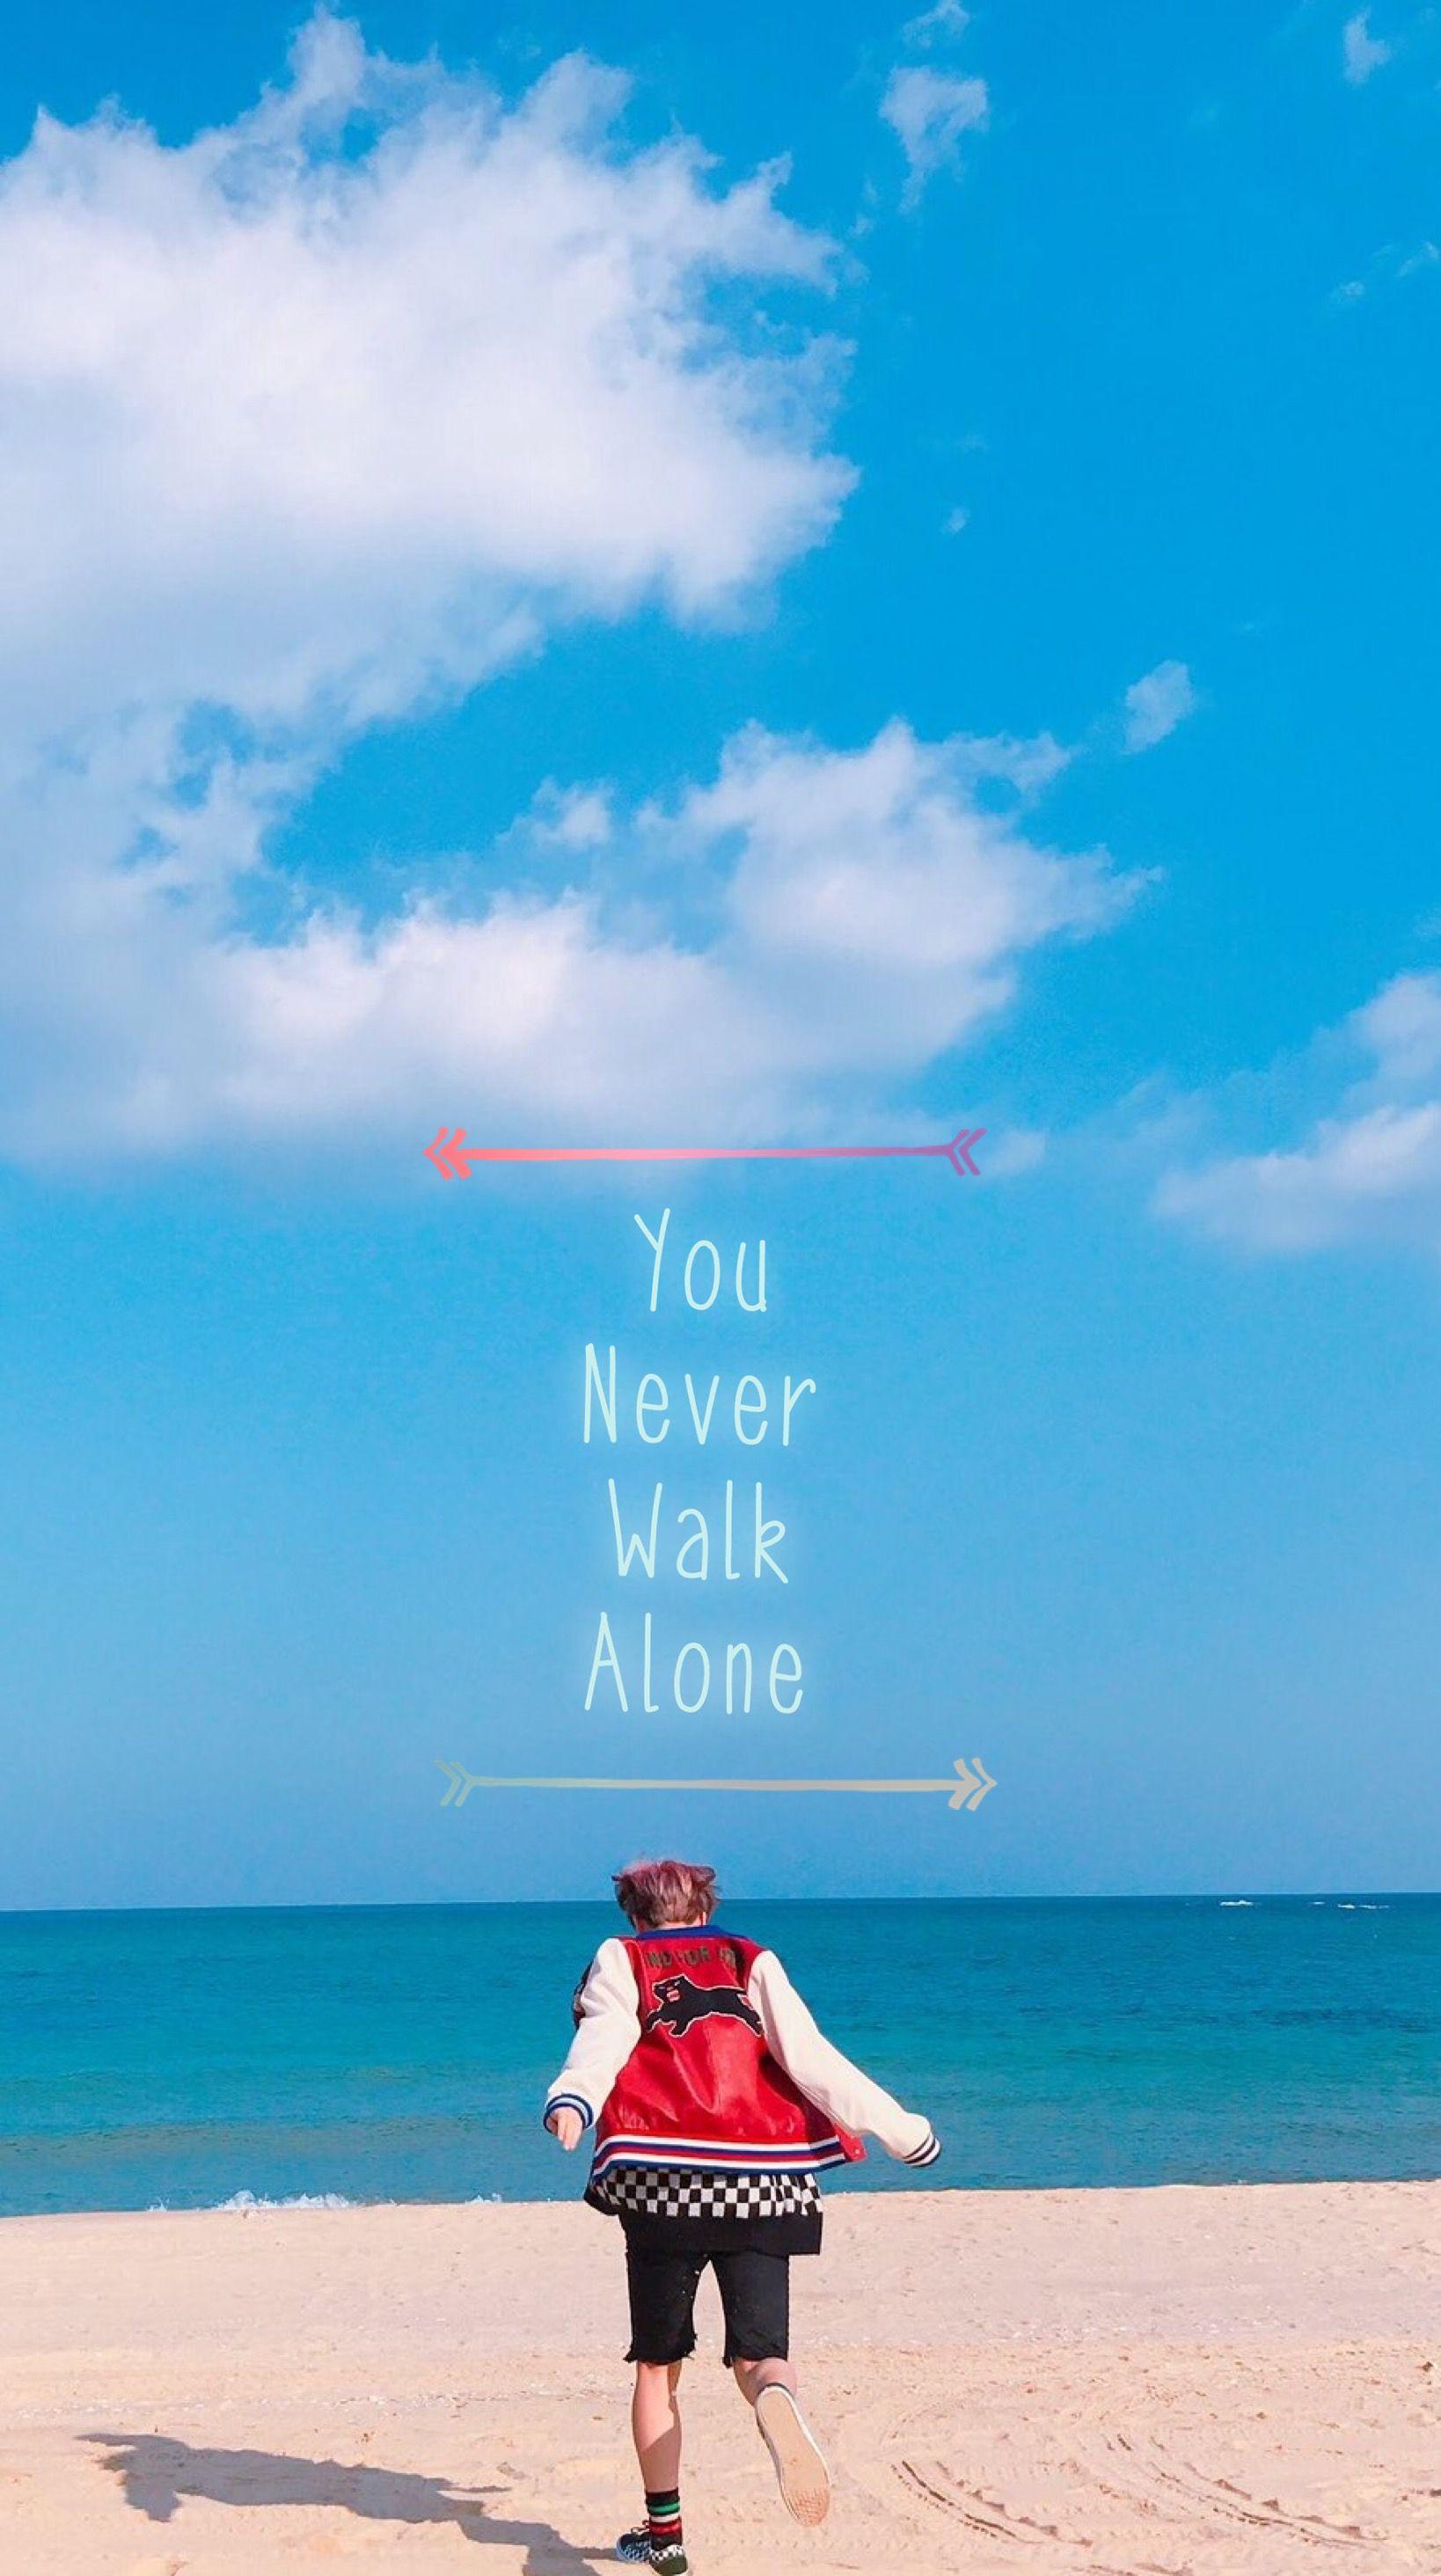 Bts You Never Walk Alone Wallpapers Top Free Bts You Never Walk Alone Backgrounds Wallpaperaccess